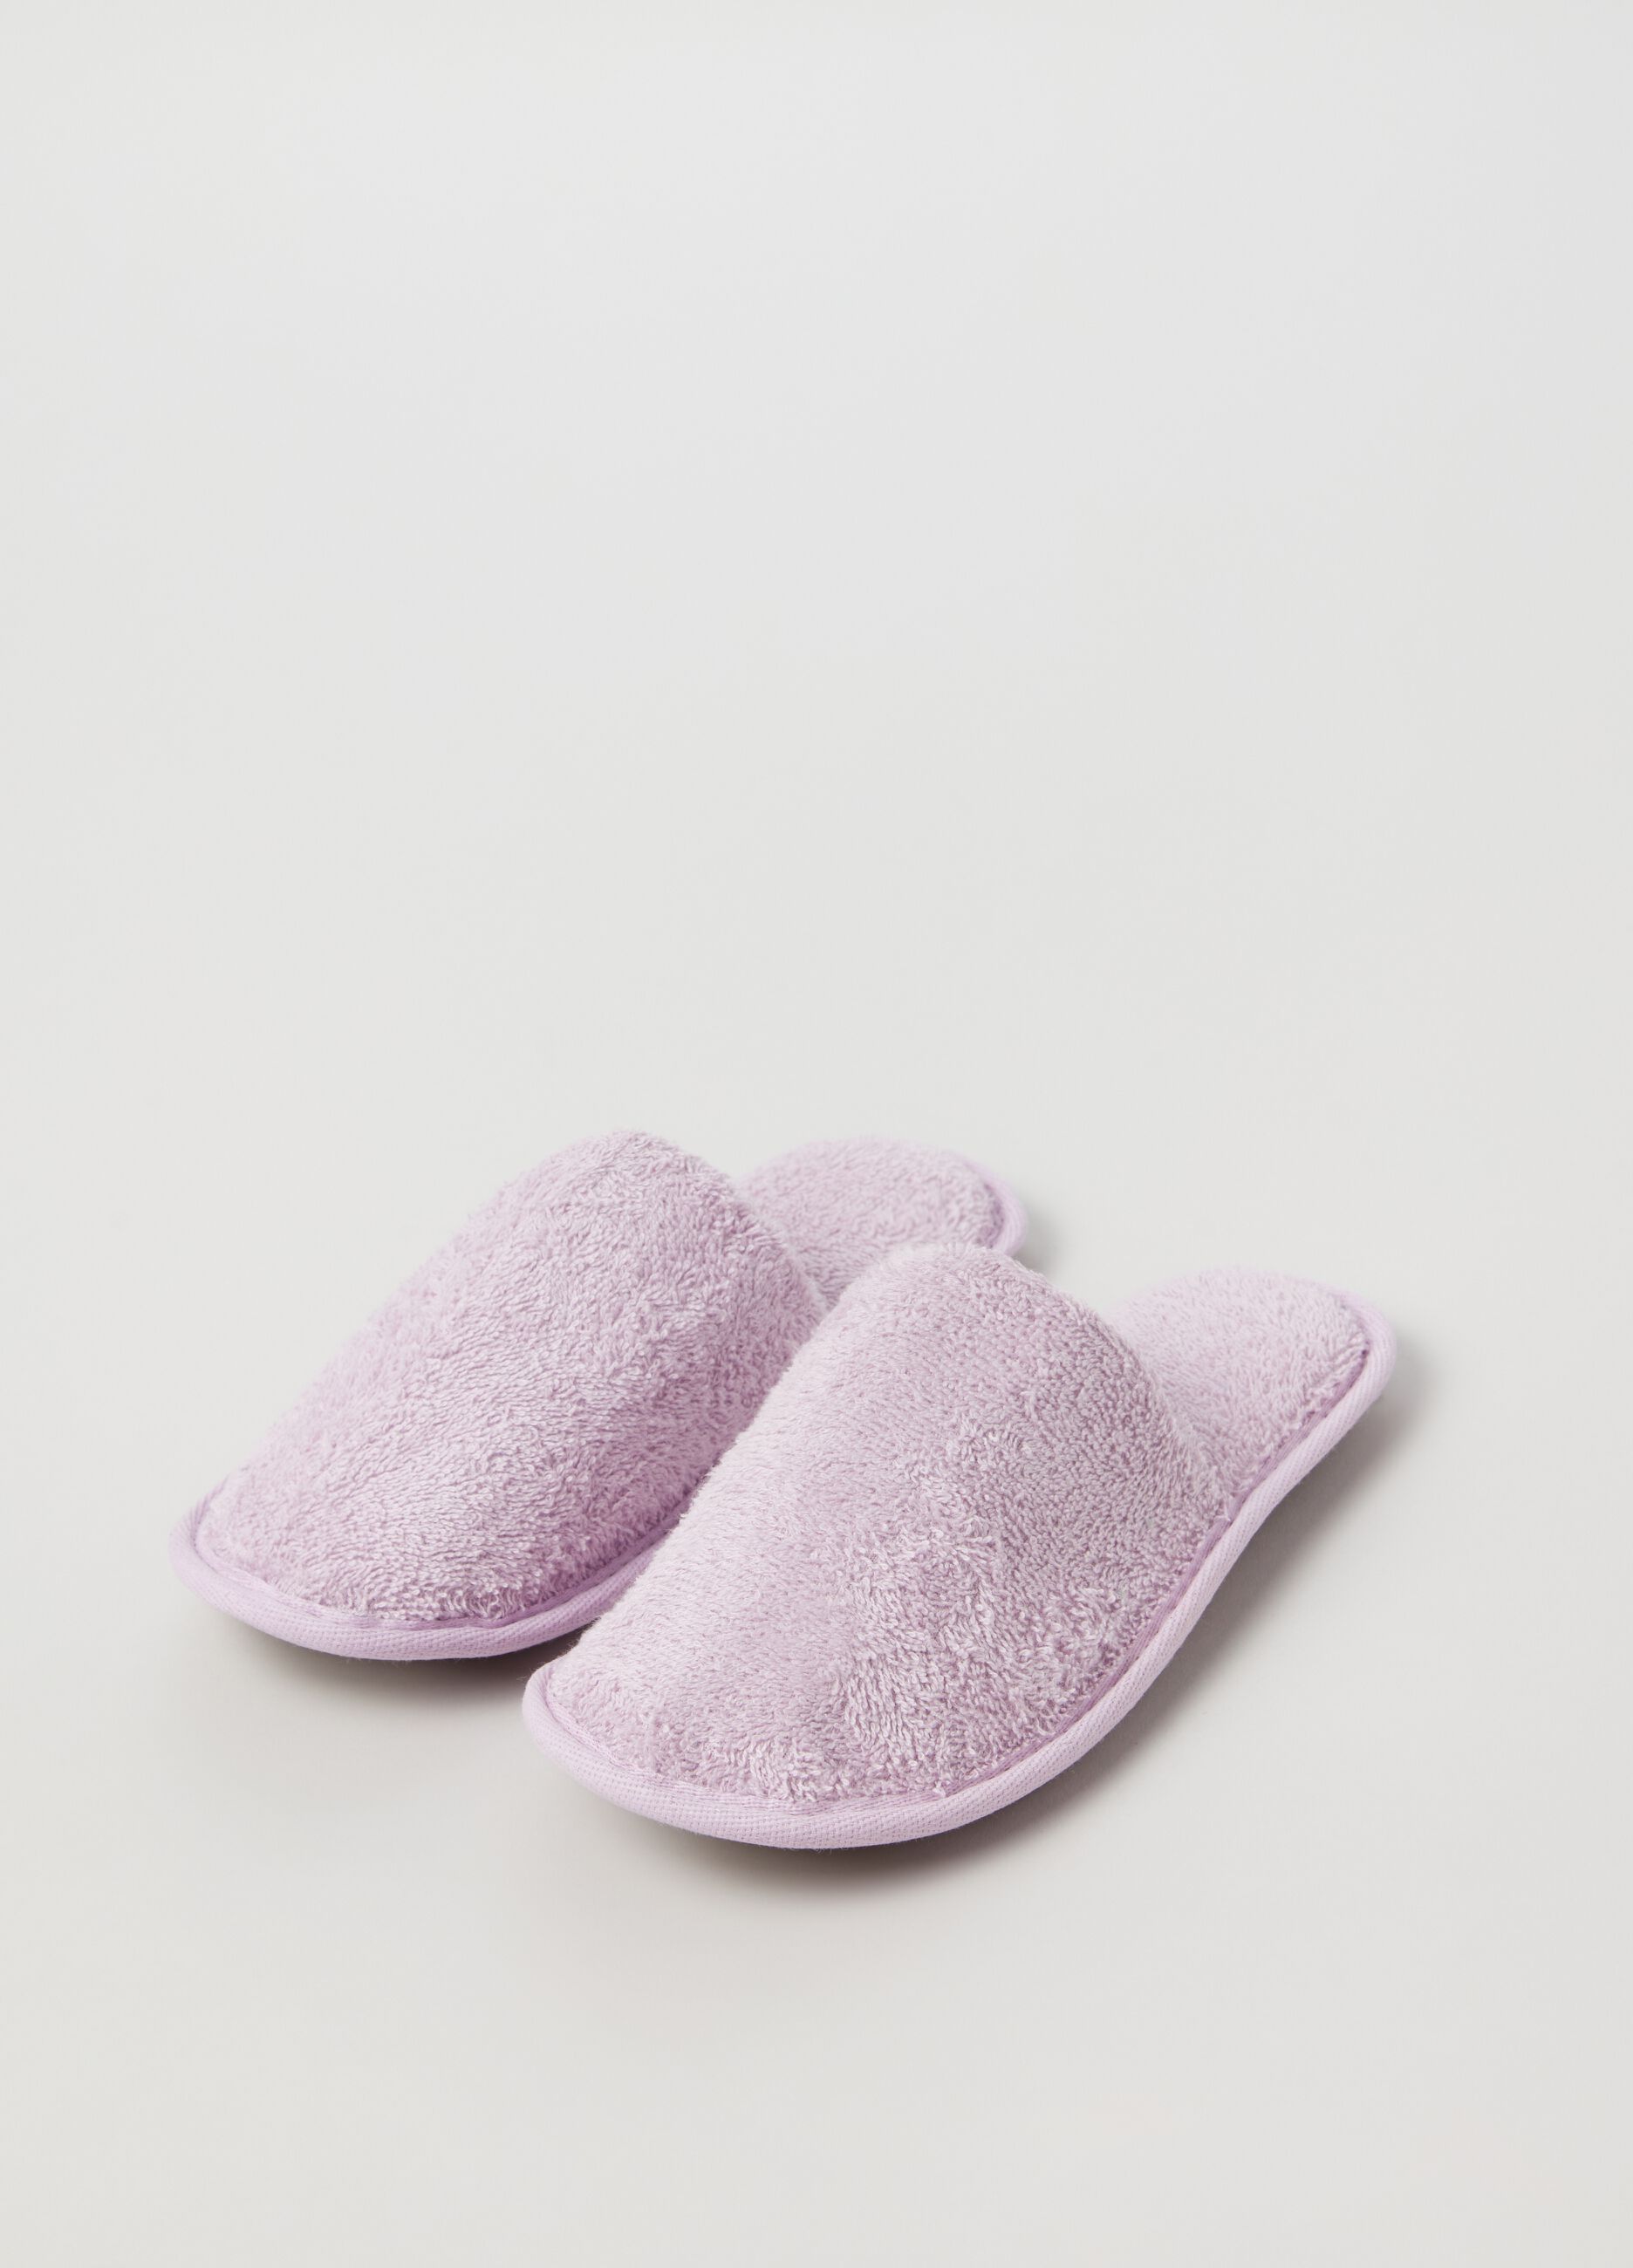 Slippers 35/37 solid colour (pink)